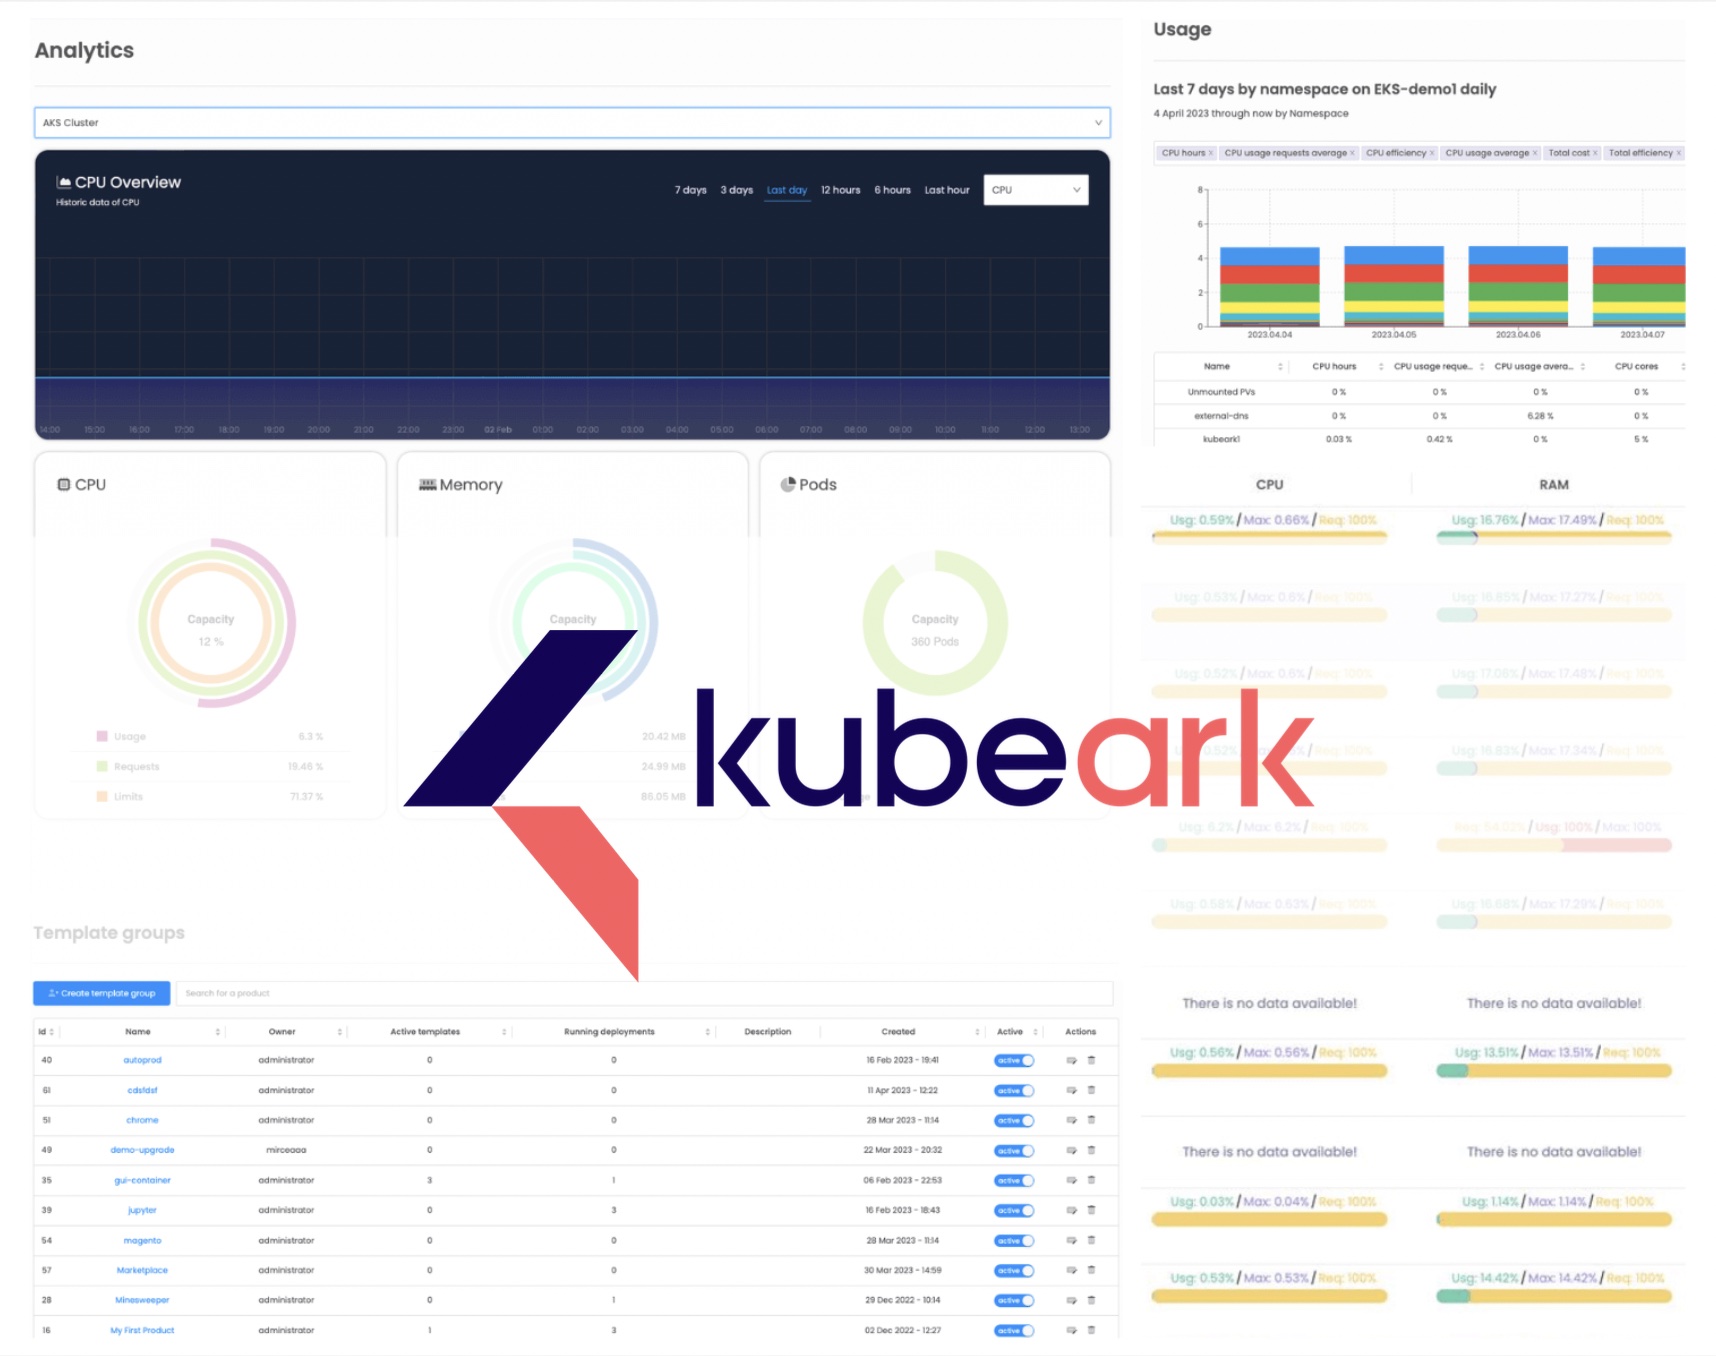 Kubeark unveils new platform release to accelerate innovation at scale through sky computing